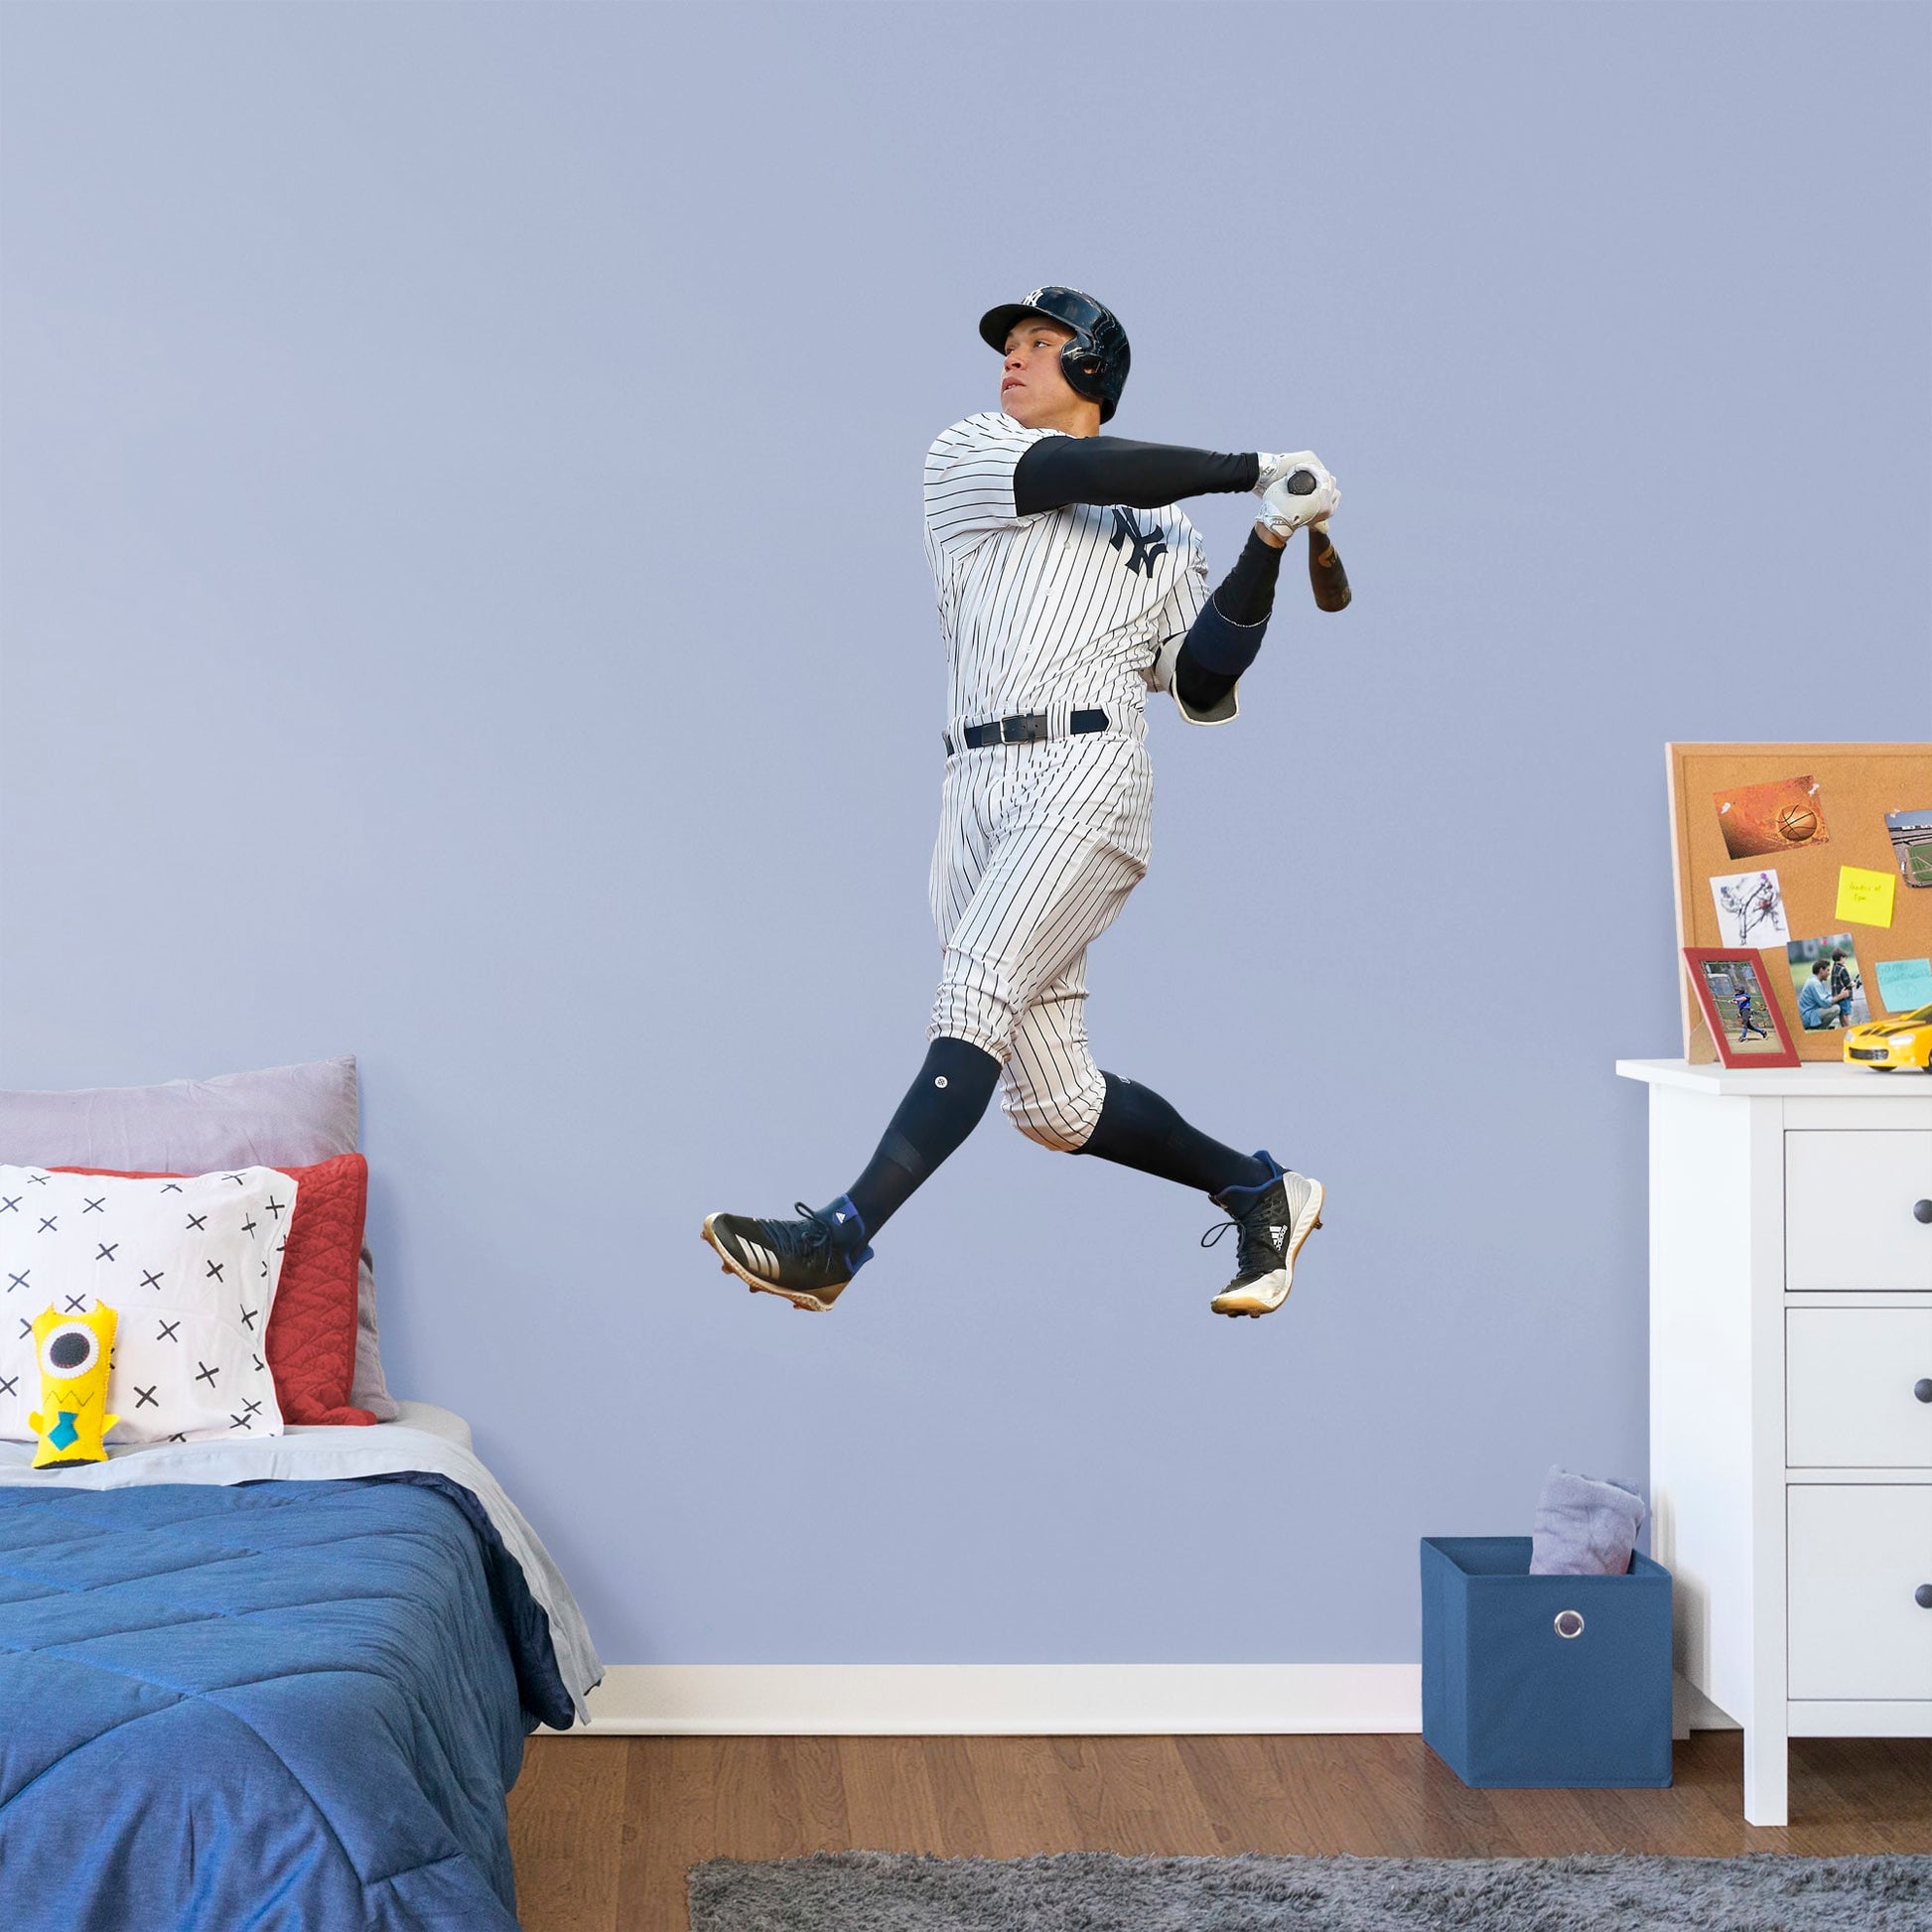 Large Athlete + 2 Decals (11"W x 17"H) Hit a home run with Bleacher Creatures and other fans of the Yankees' navy and white pinstripes with this officially licensed MBL wall decal featuring outfielder Aaron Judge. Easy to apply and remove, this high-quality decal displays the full frame of the former Fresno State Bulldog and the American League's 2017 Rookie of the Year.